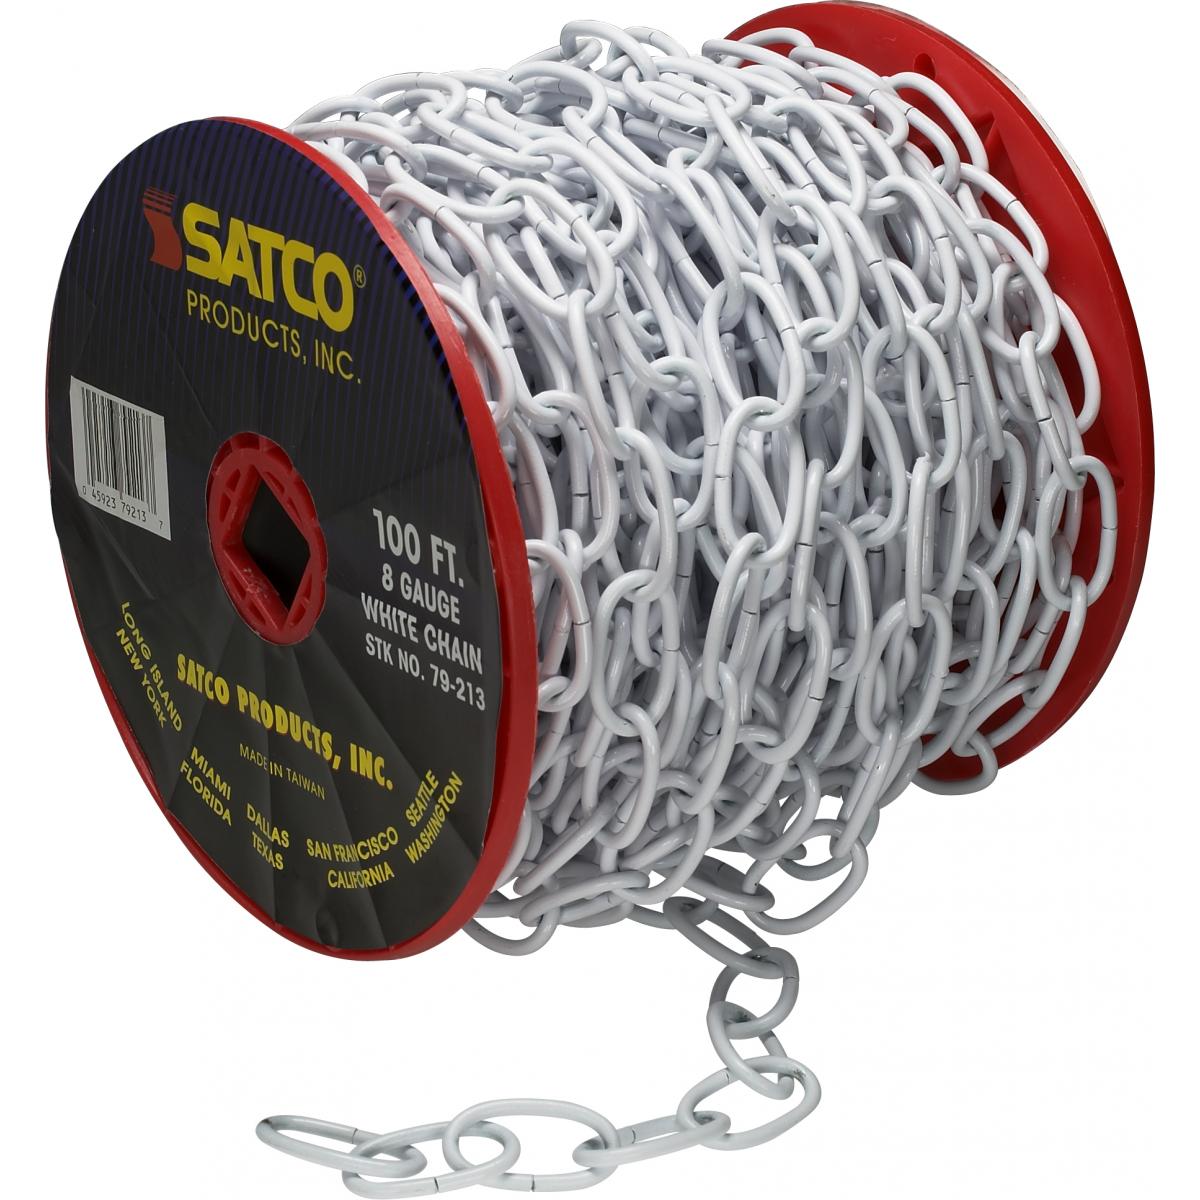 Satco 79-213 8 Ga. Chain White Finish 100 ft. to Reel 1 Reel To Master 35lbs Max